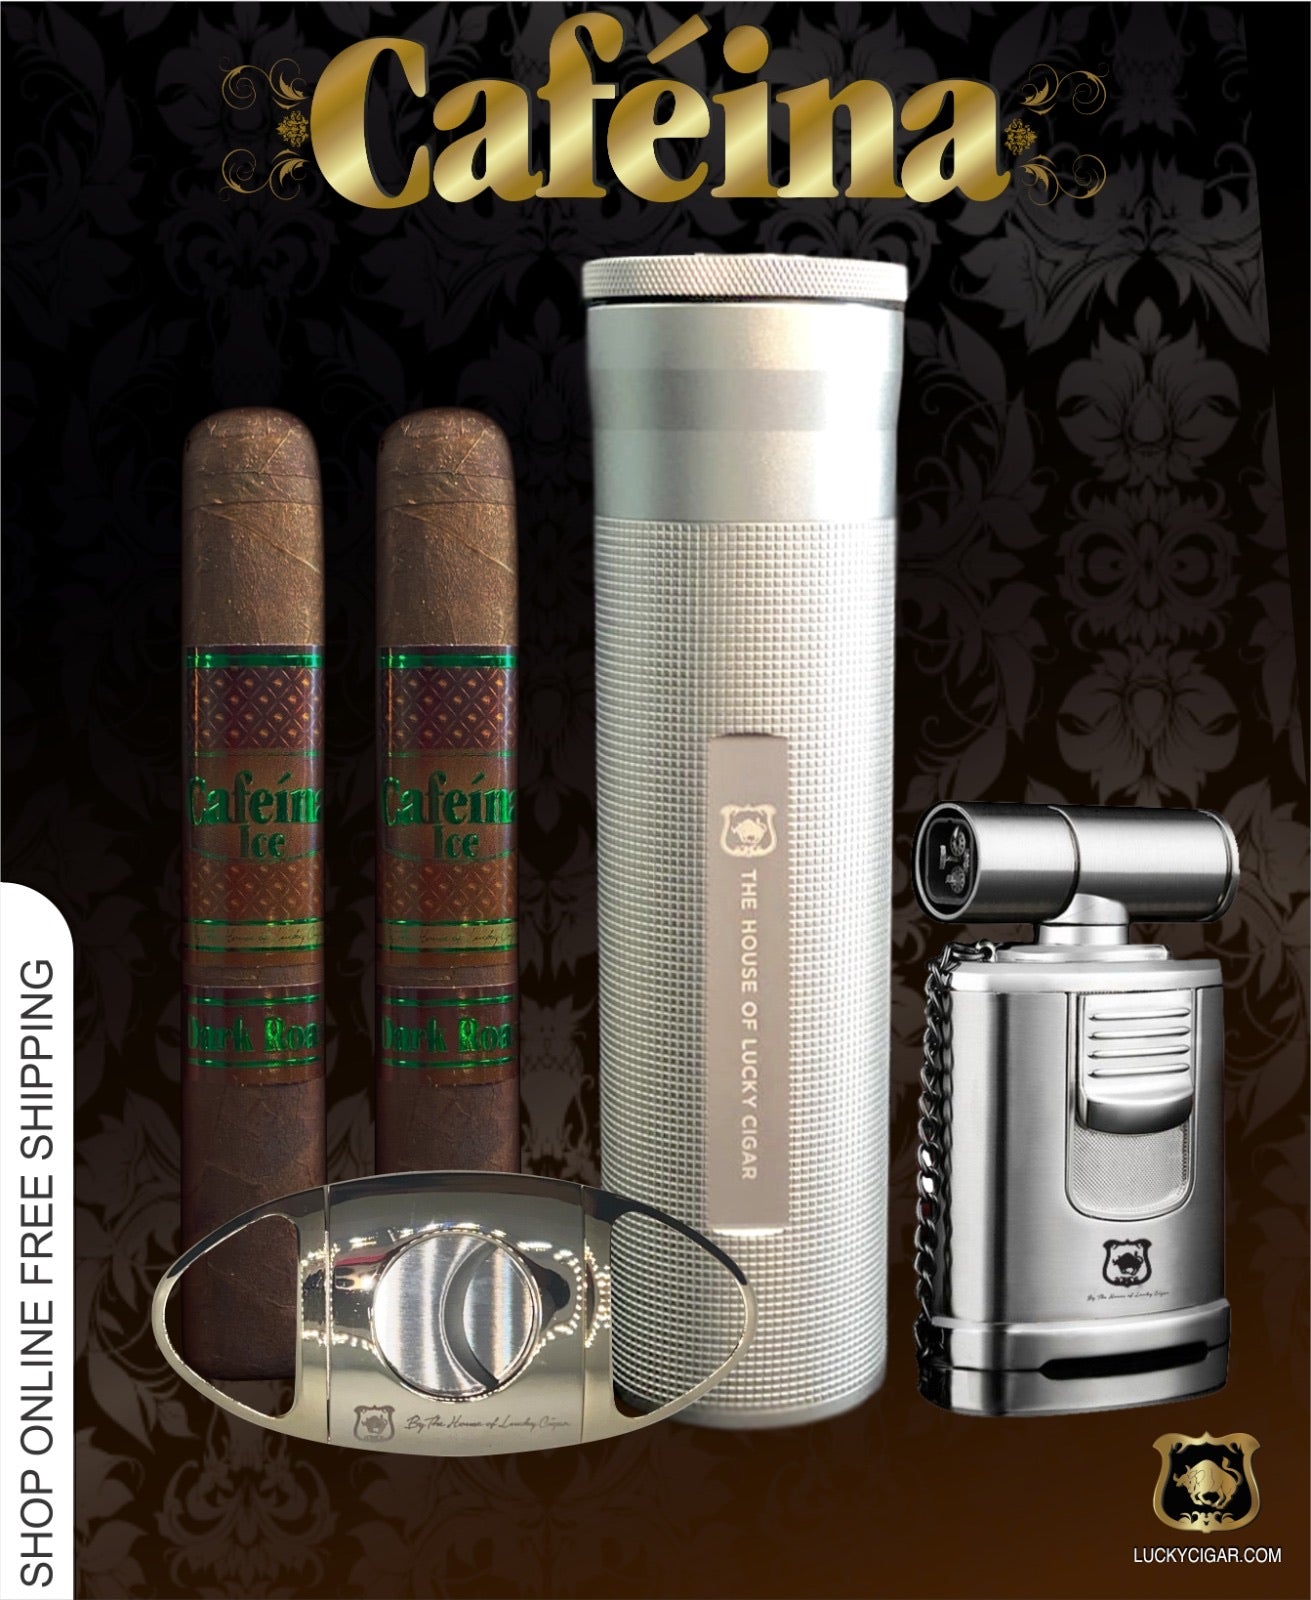 Lucky Cigar Sampler Sets: Set of 2 Cafeina Cigars with Cutter, Desk Torch, Travel Humidor Tube with Hygrometer